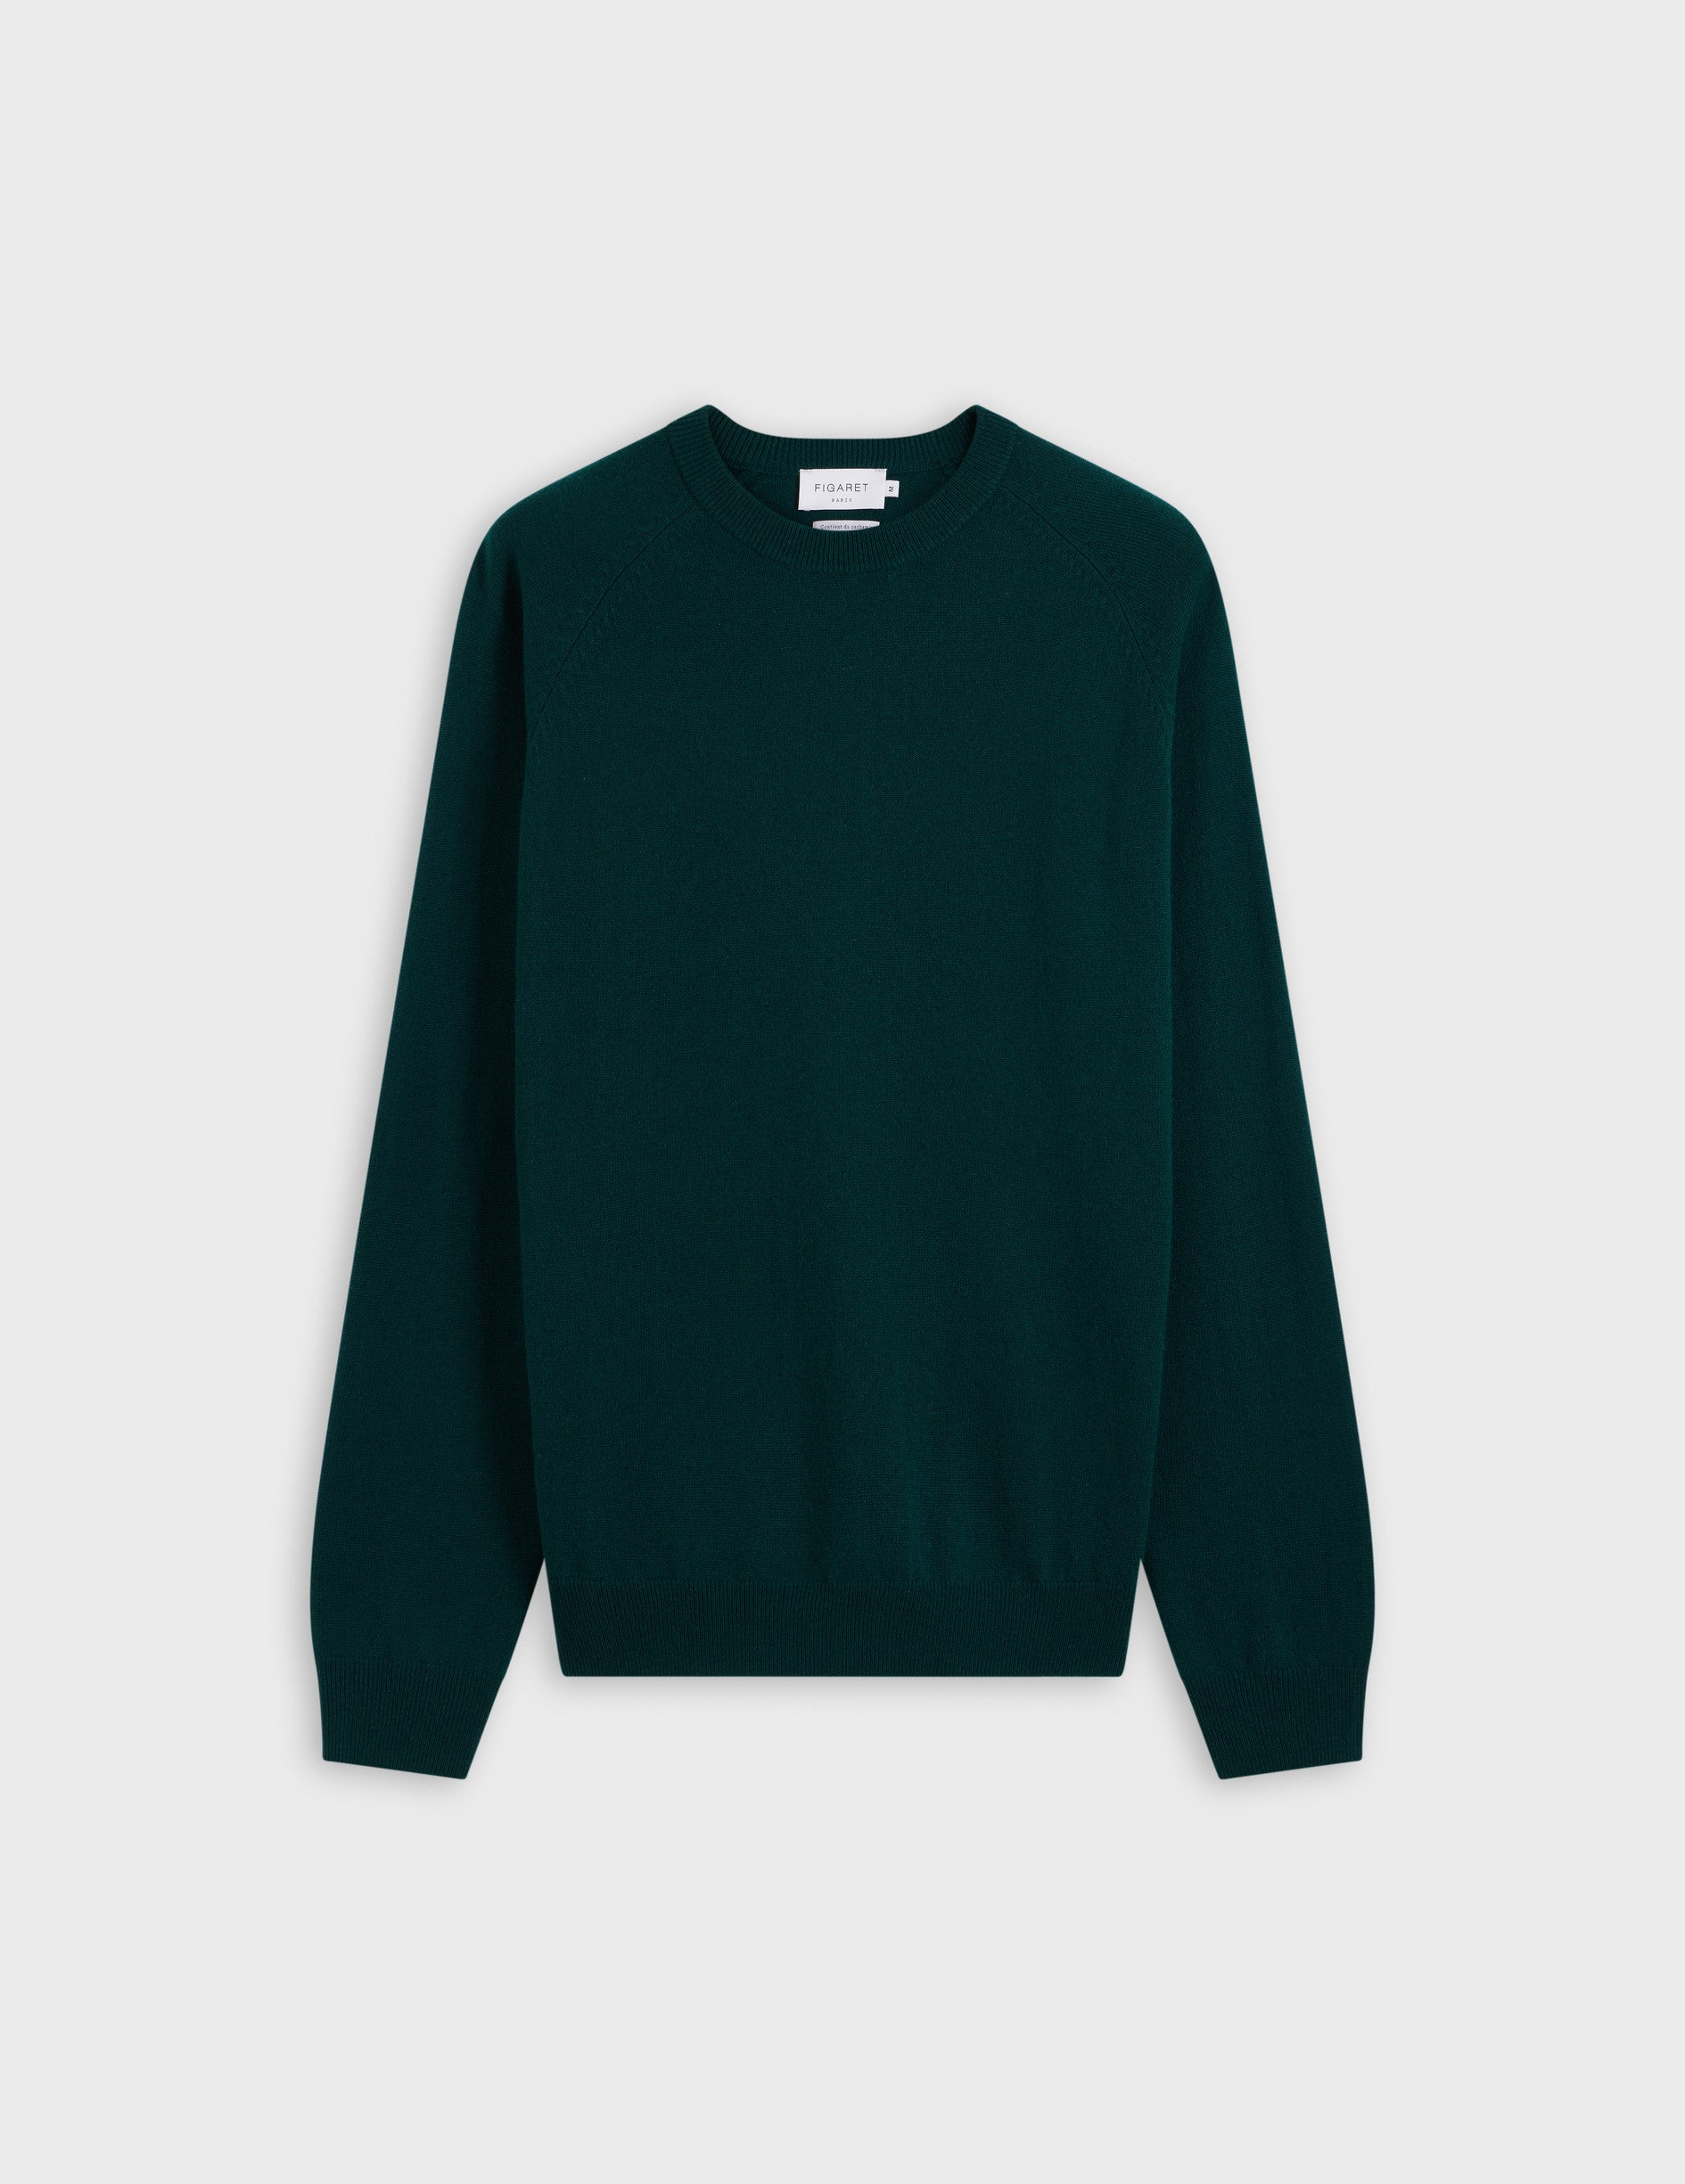 Emile sweater in green wool and cashmere